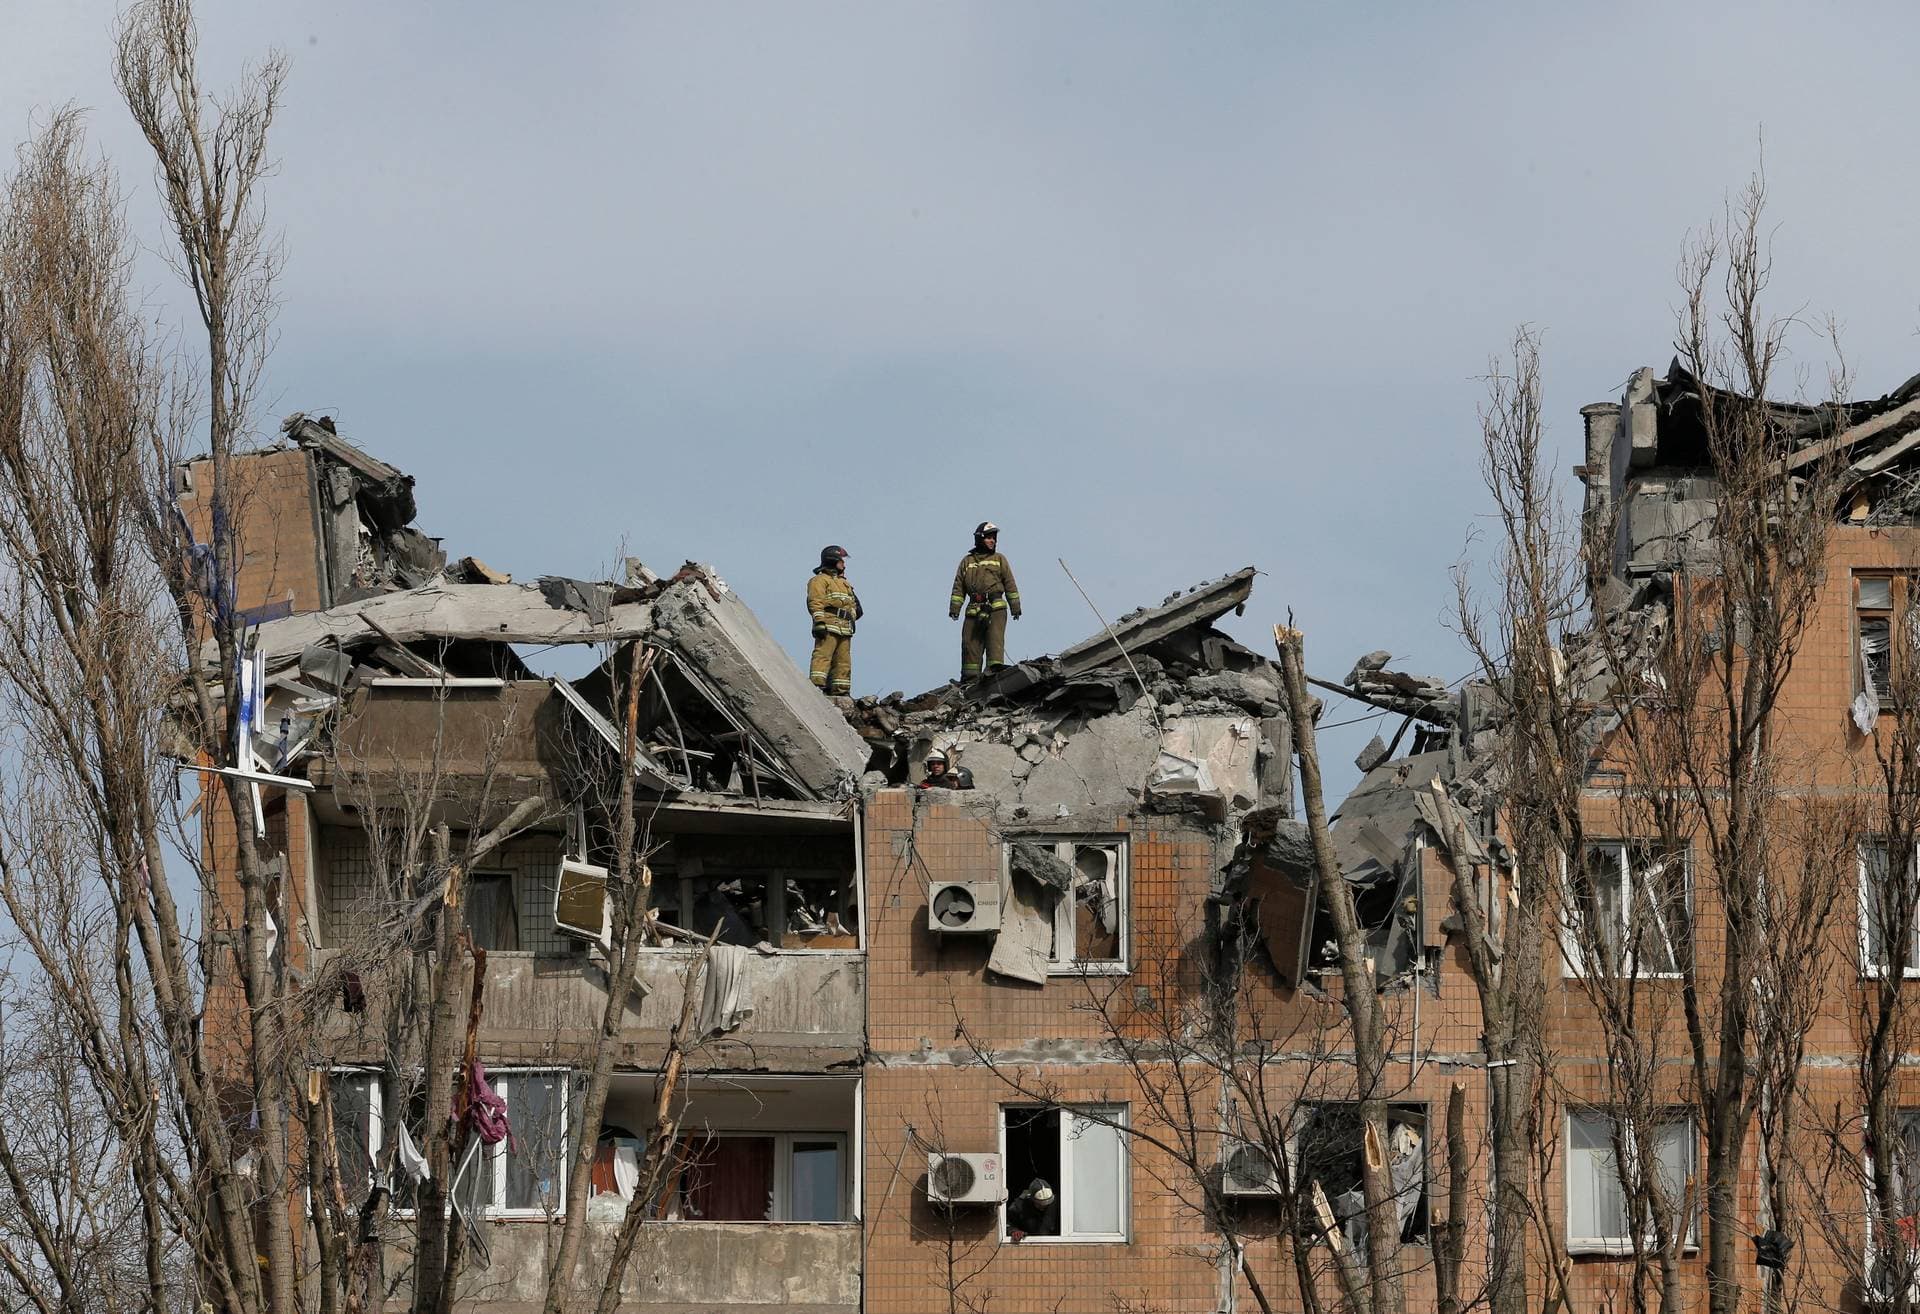 Firefighters work at a residential building damaged by shelling during Ukraine-Russia conflict in the separatist-controlled city of Donetsk